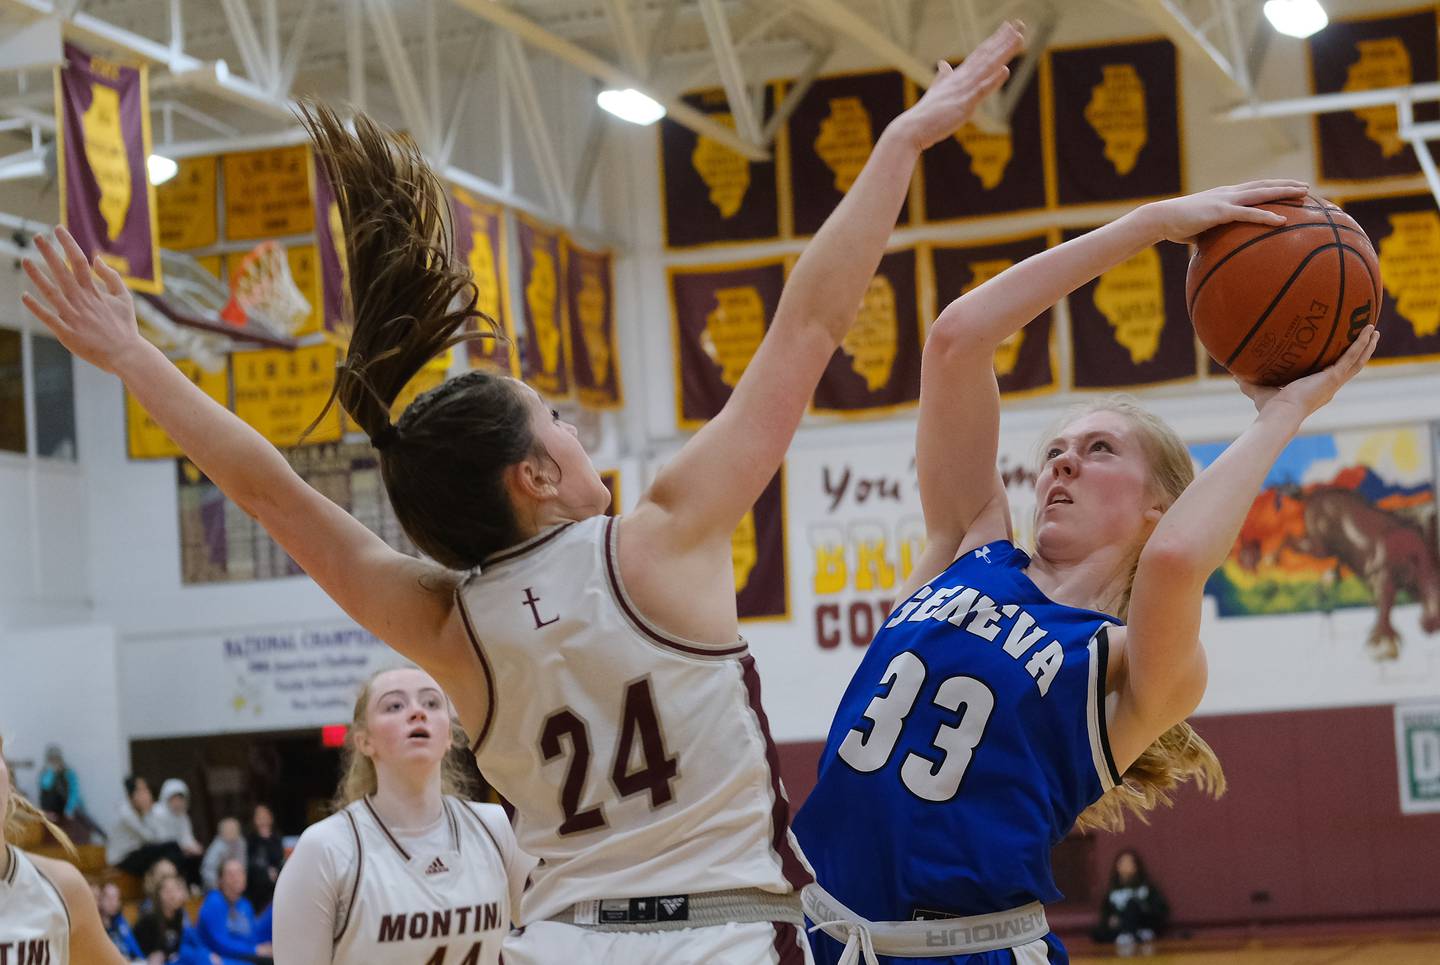 Geneva's Lauren Slagle (33) shoots as Montini's Peyton Farrell (24) defends during a Coach Kipp Hoopsfest game on Jan. 14, 2023 at Montini Catholic High School in Lombard.